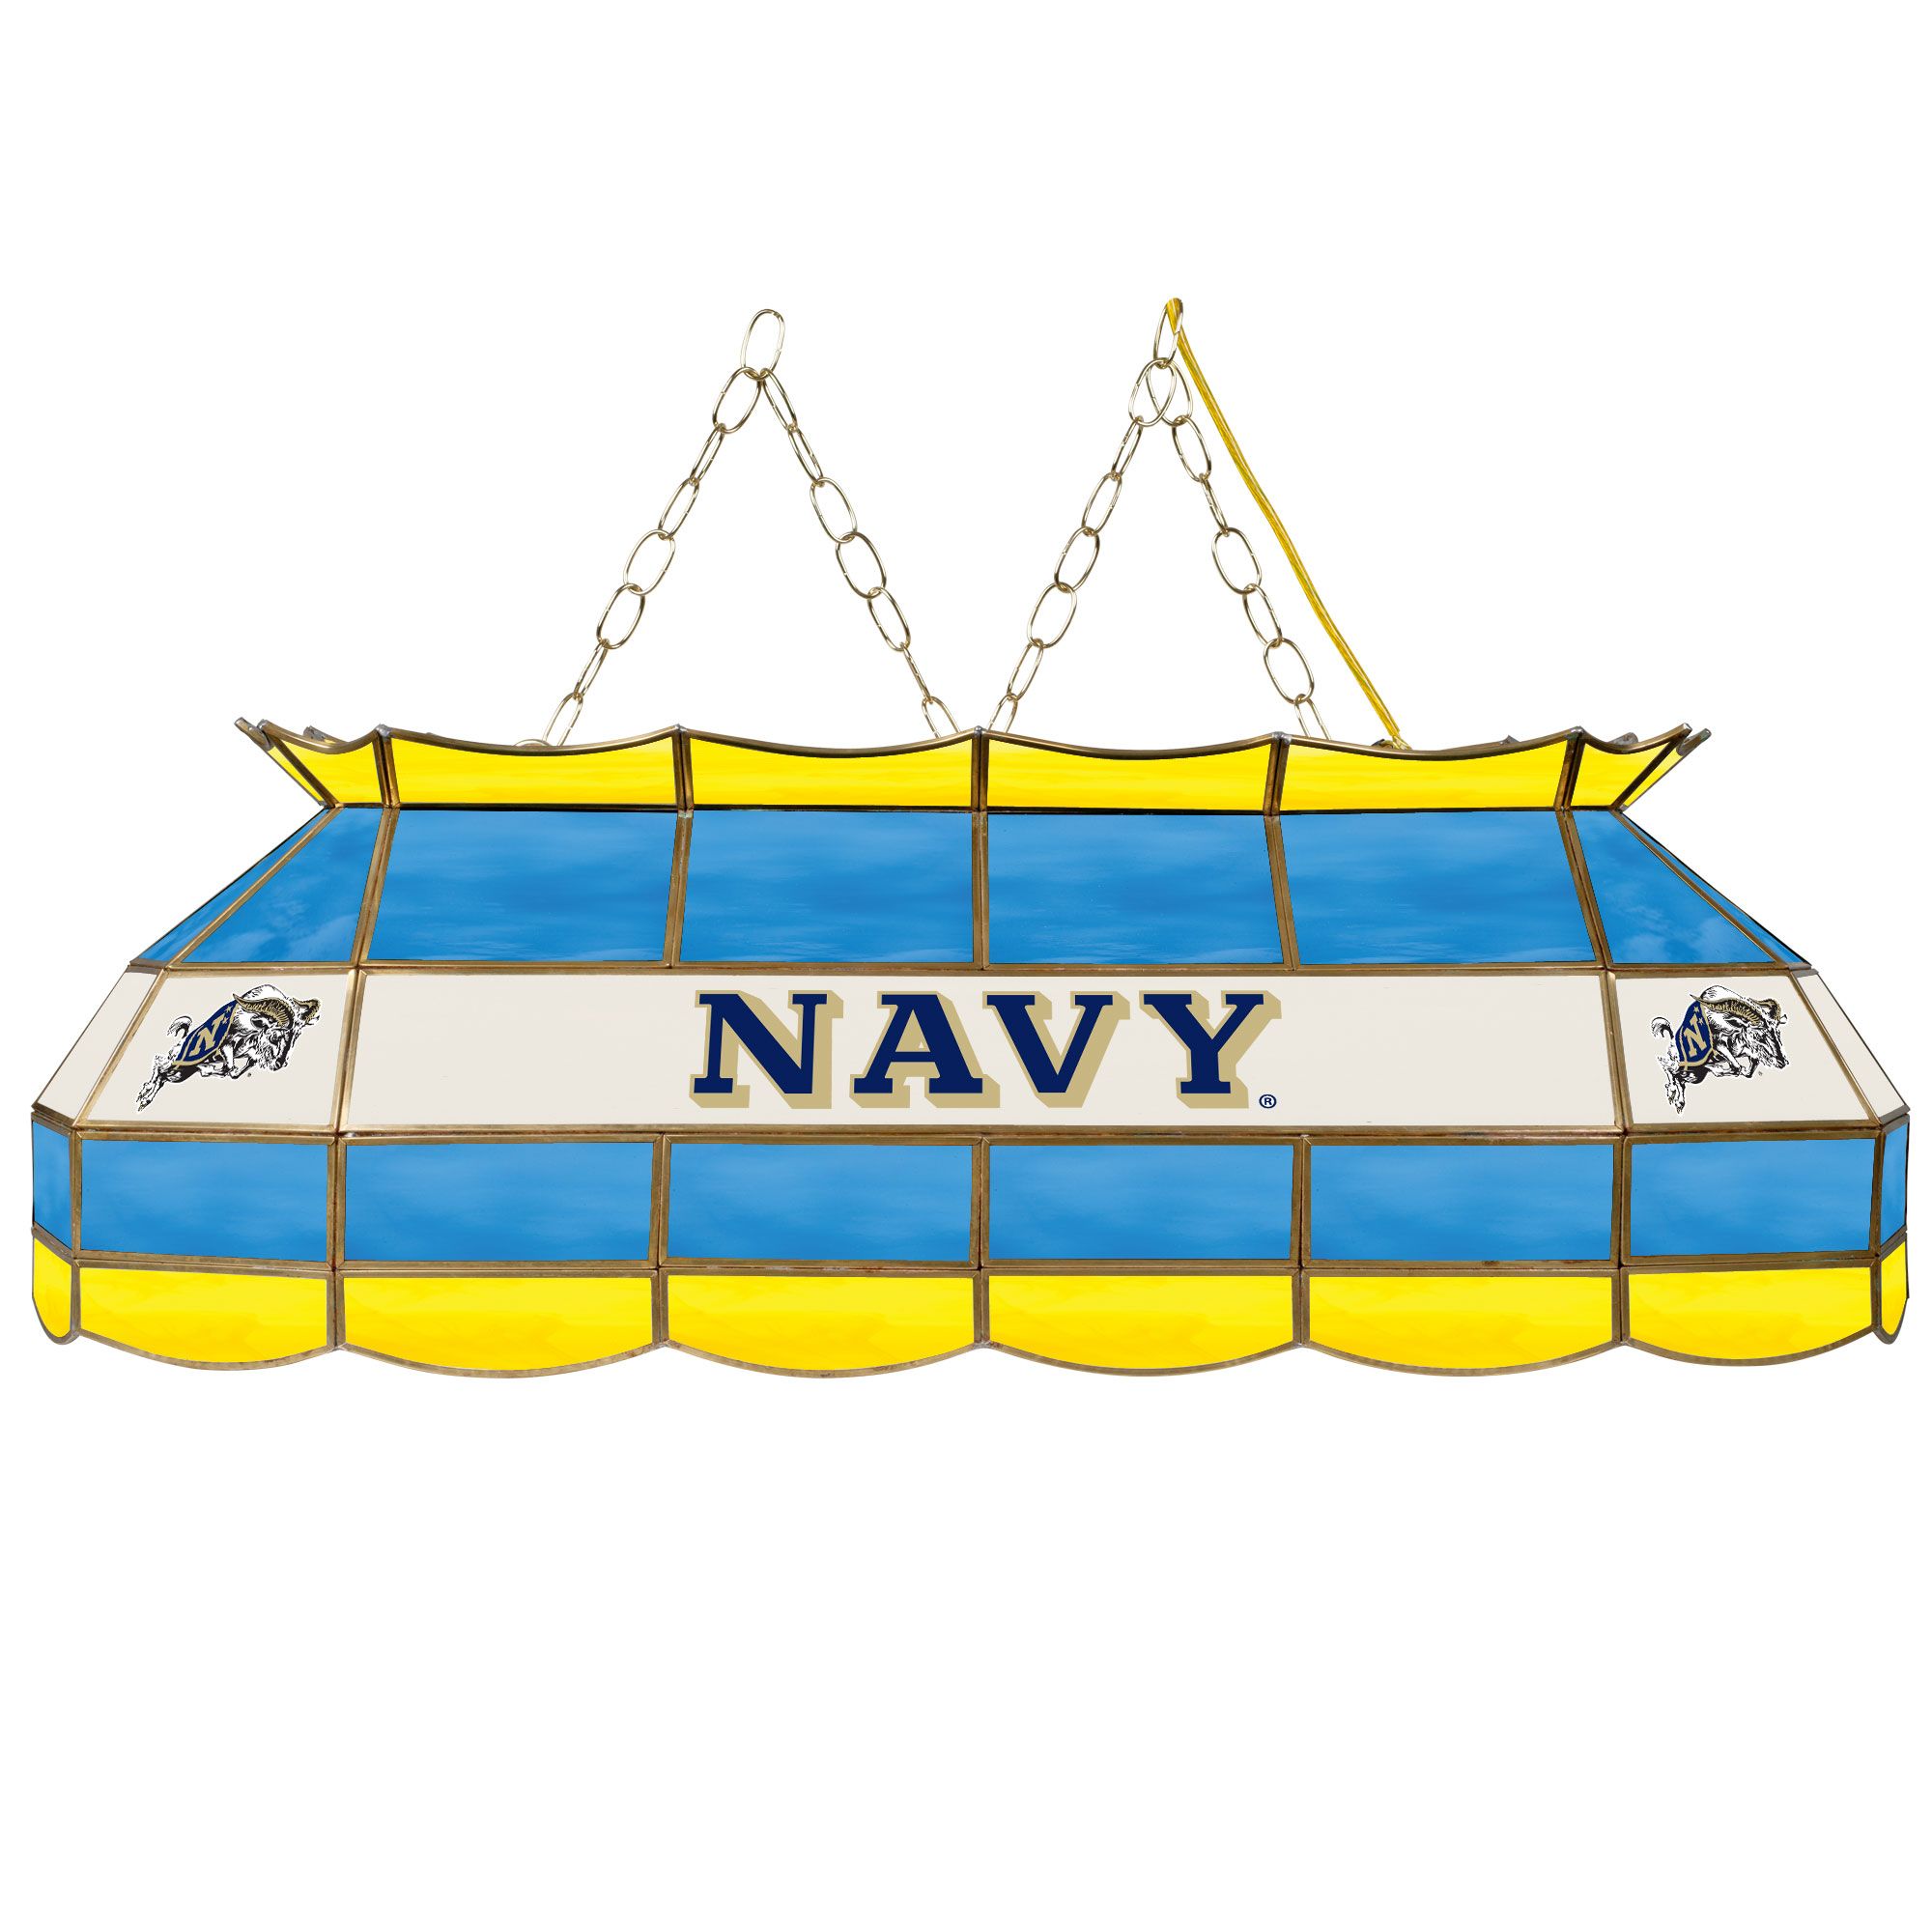 United States Naval Academy 40 inch Stained Glass Tiffany Style Lamp